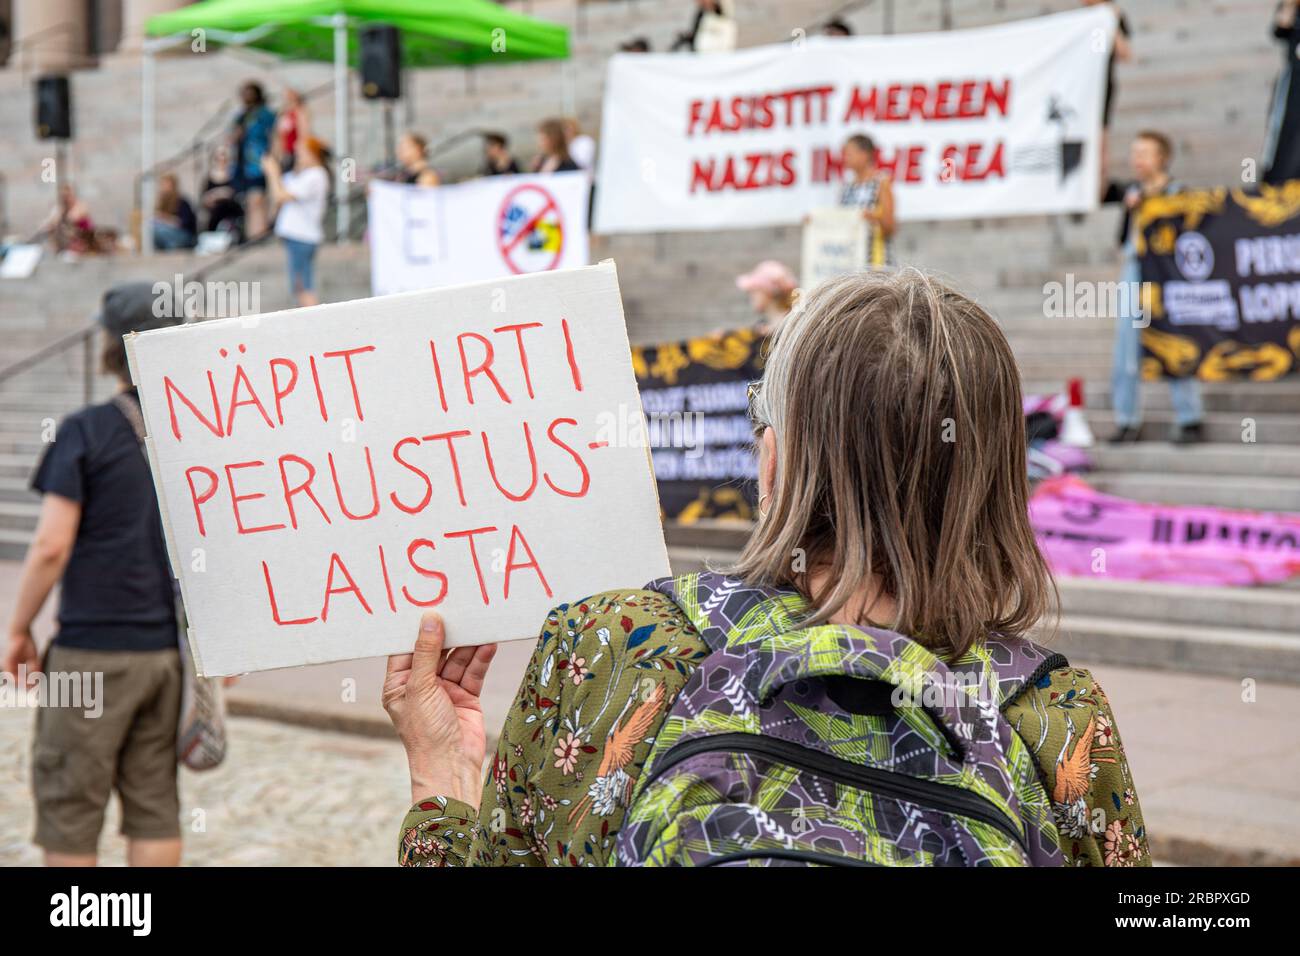 Näpit irti perustuslaista. Protester holding a cardboard sign at demonstration against rich-wing government in front of Parliament House. Stock Photo